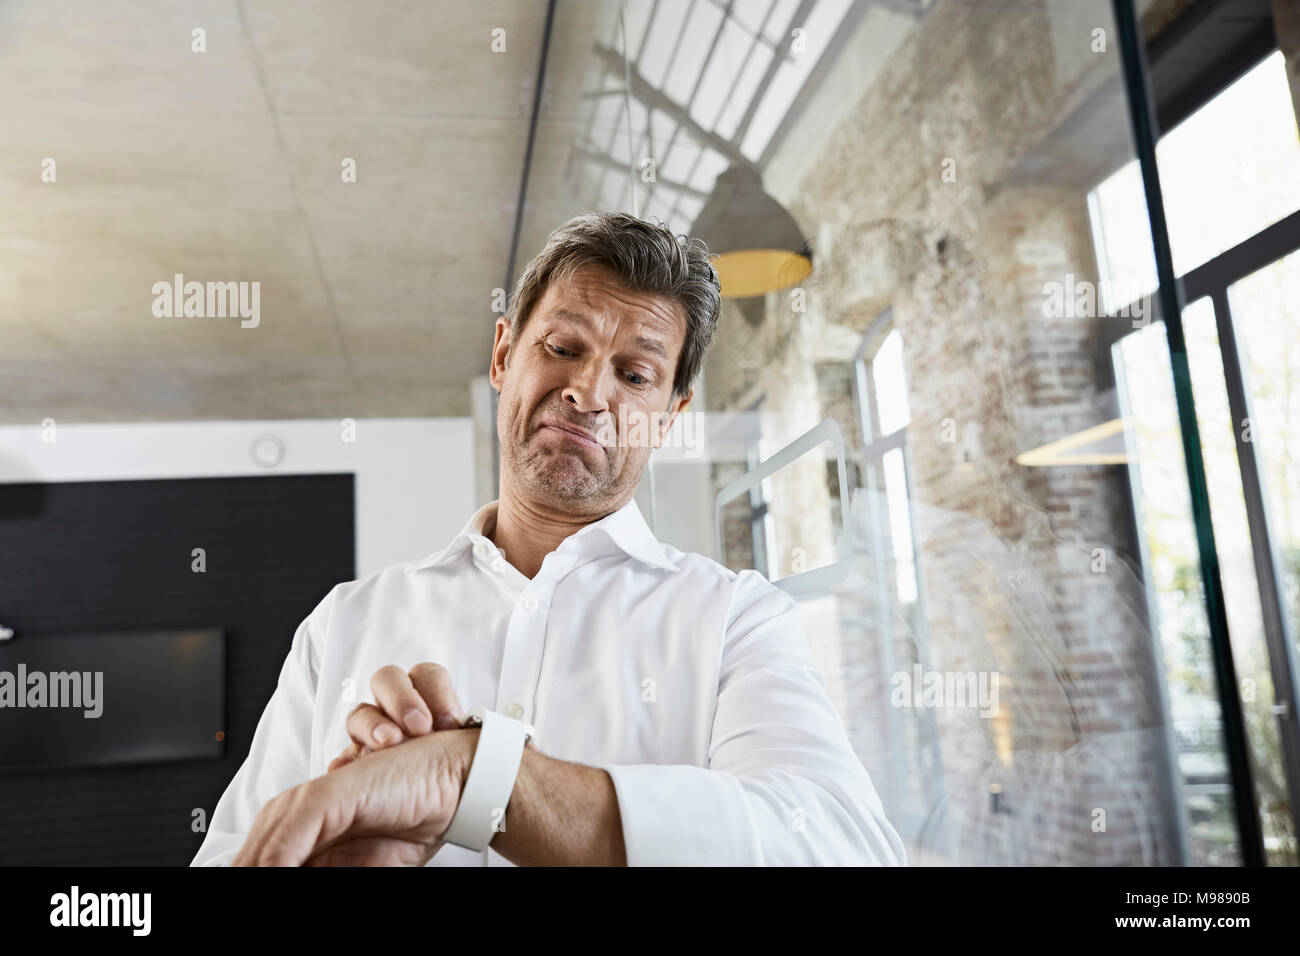 Sceptical businessman in office using smartwatch Stock Photo